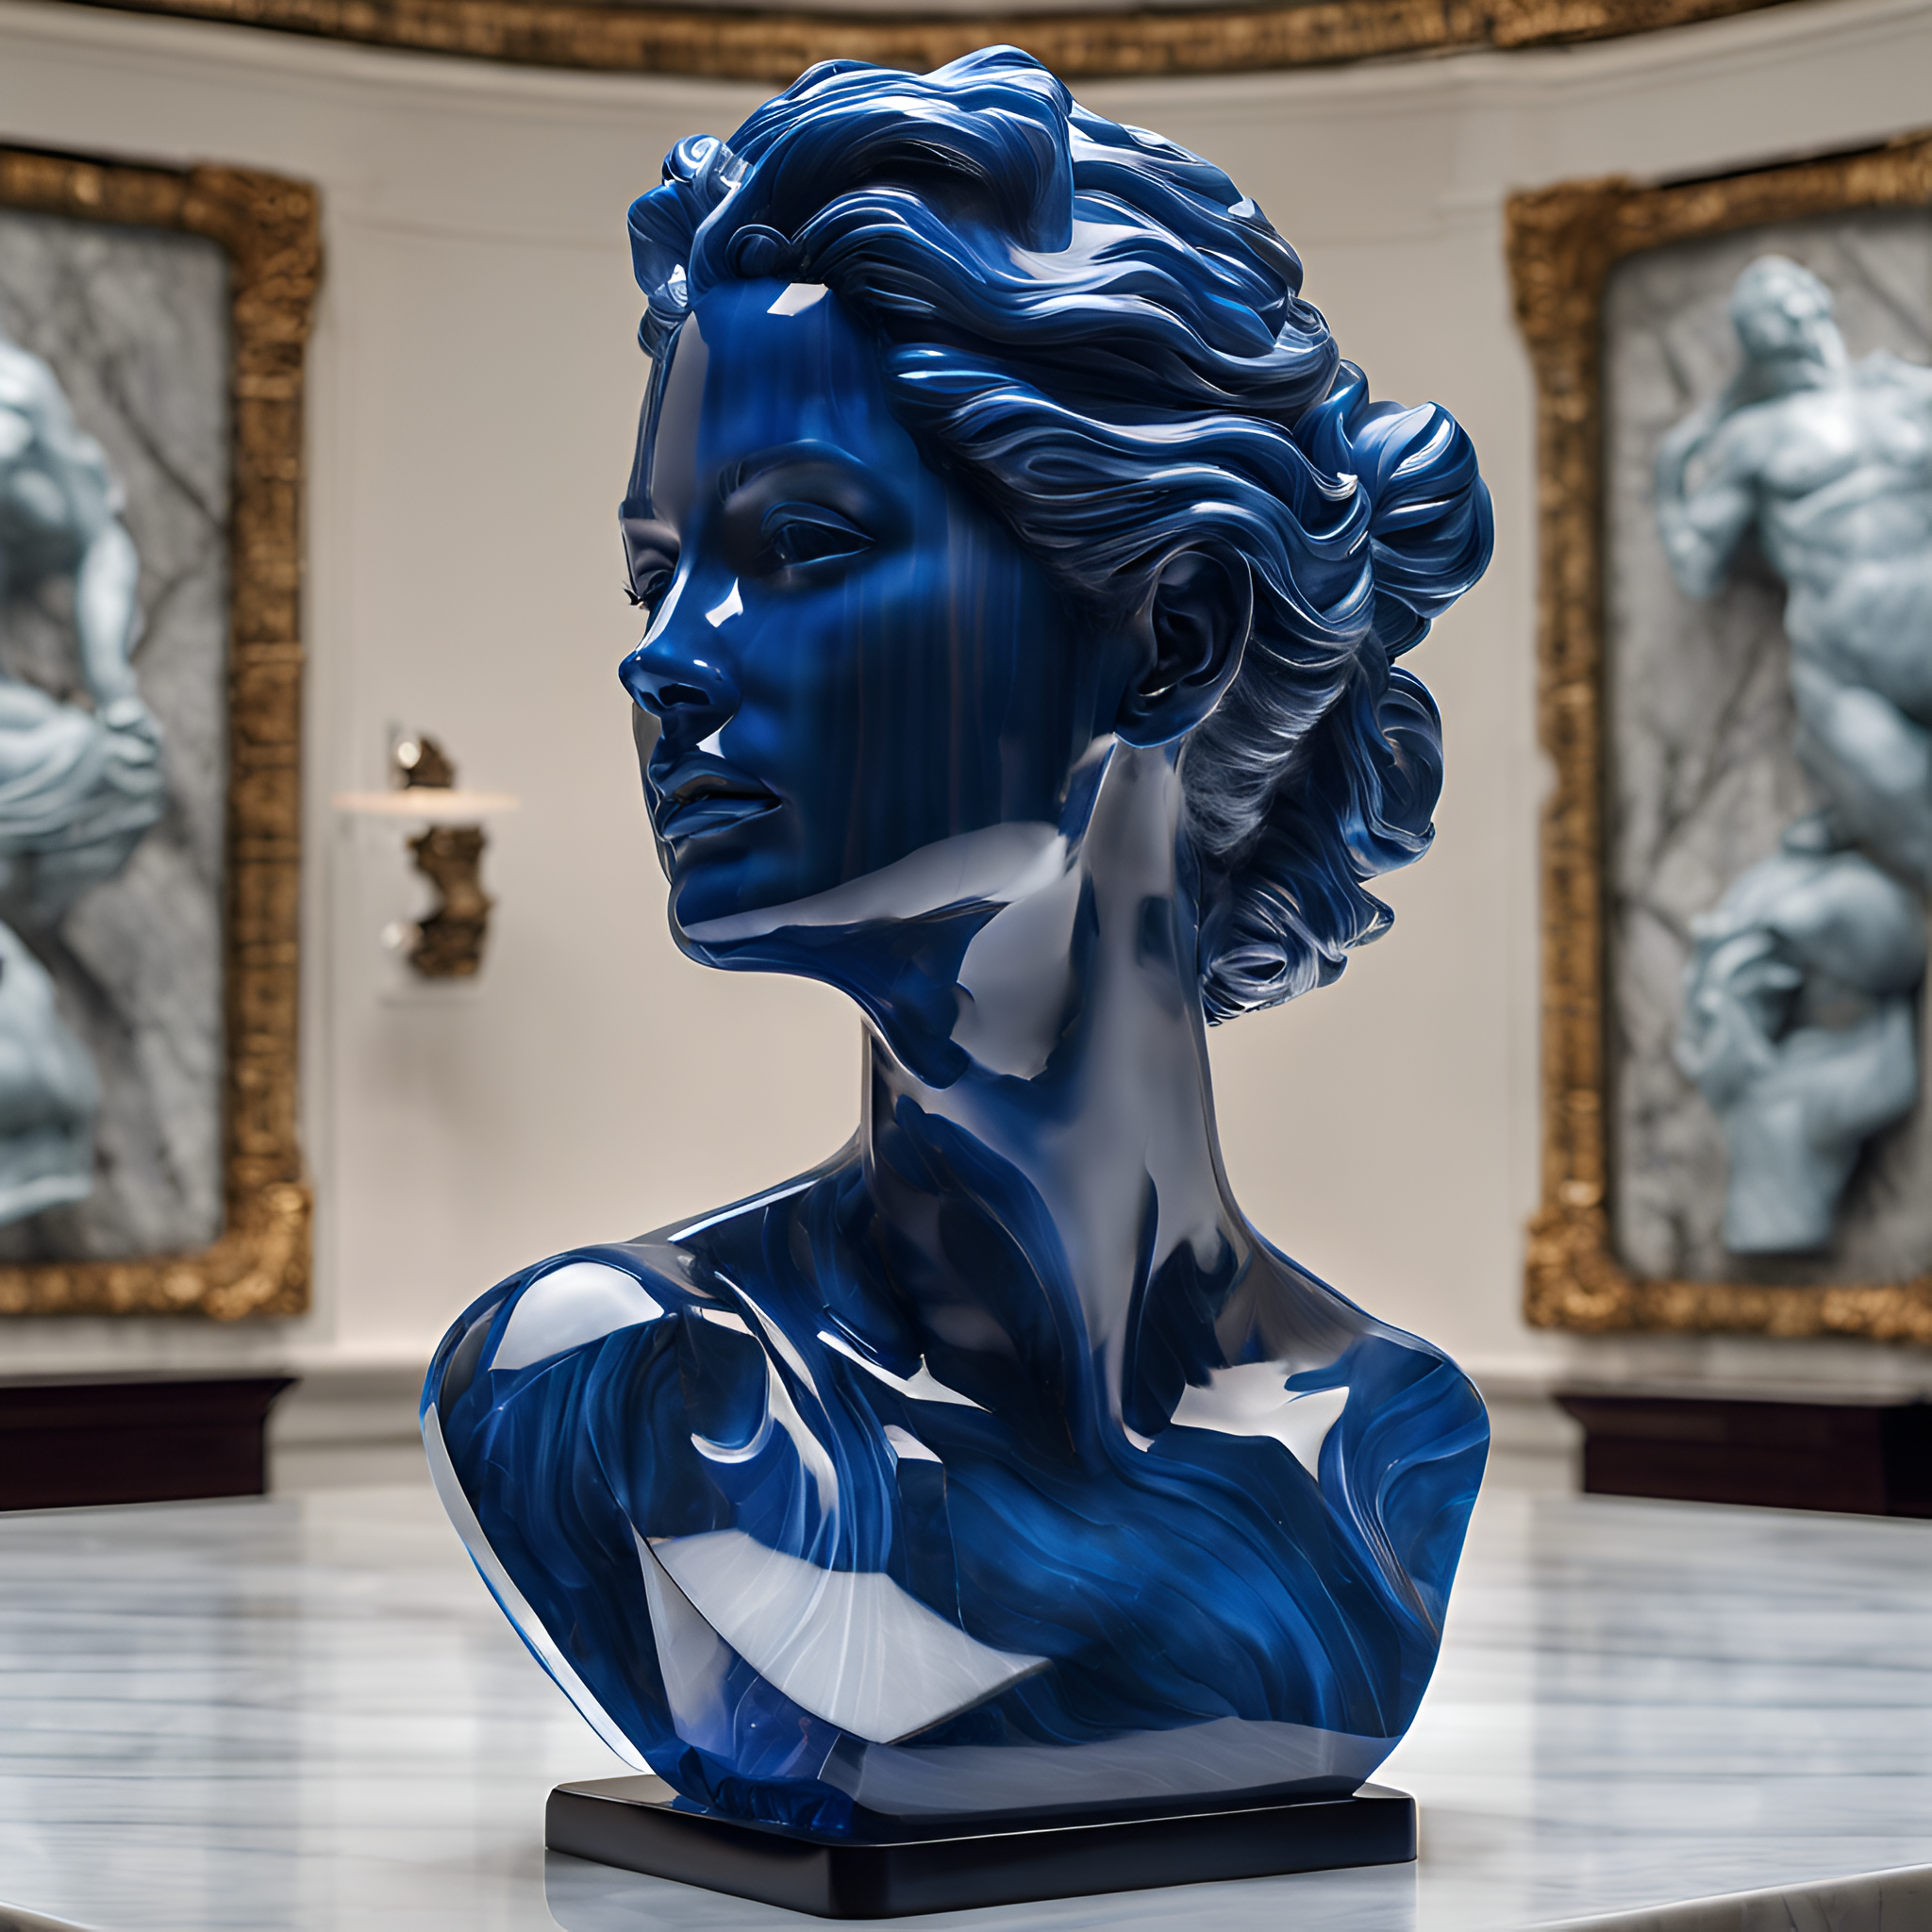 A striking bust of a woman in blue crystalline marble